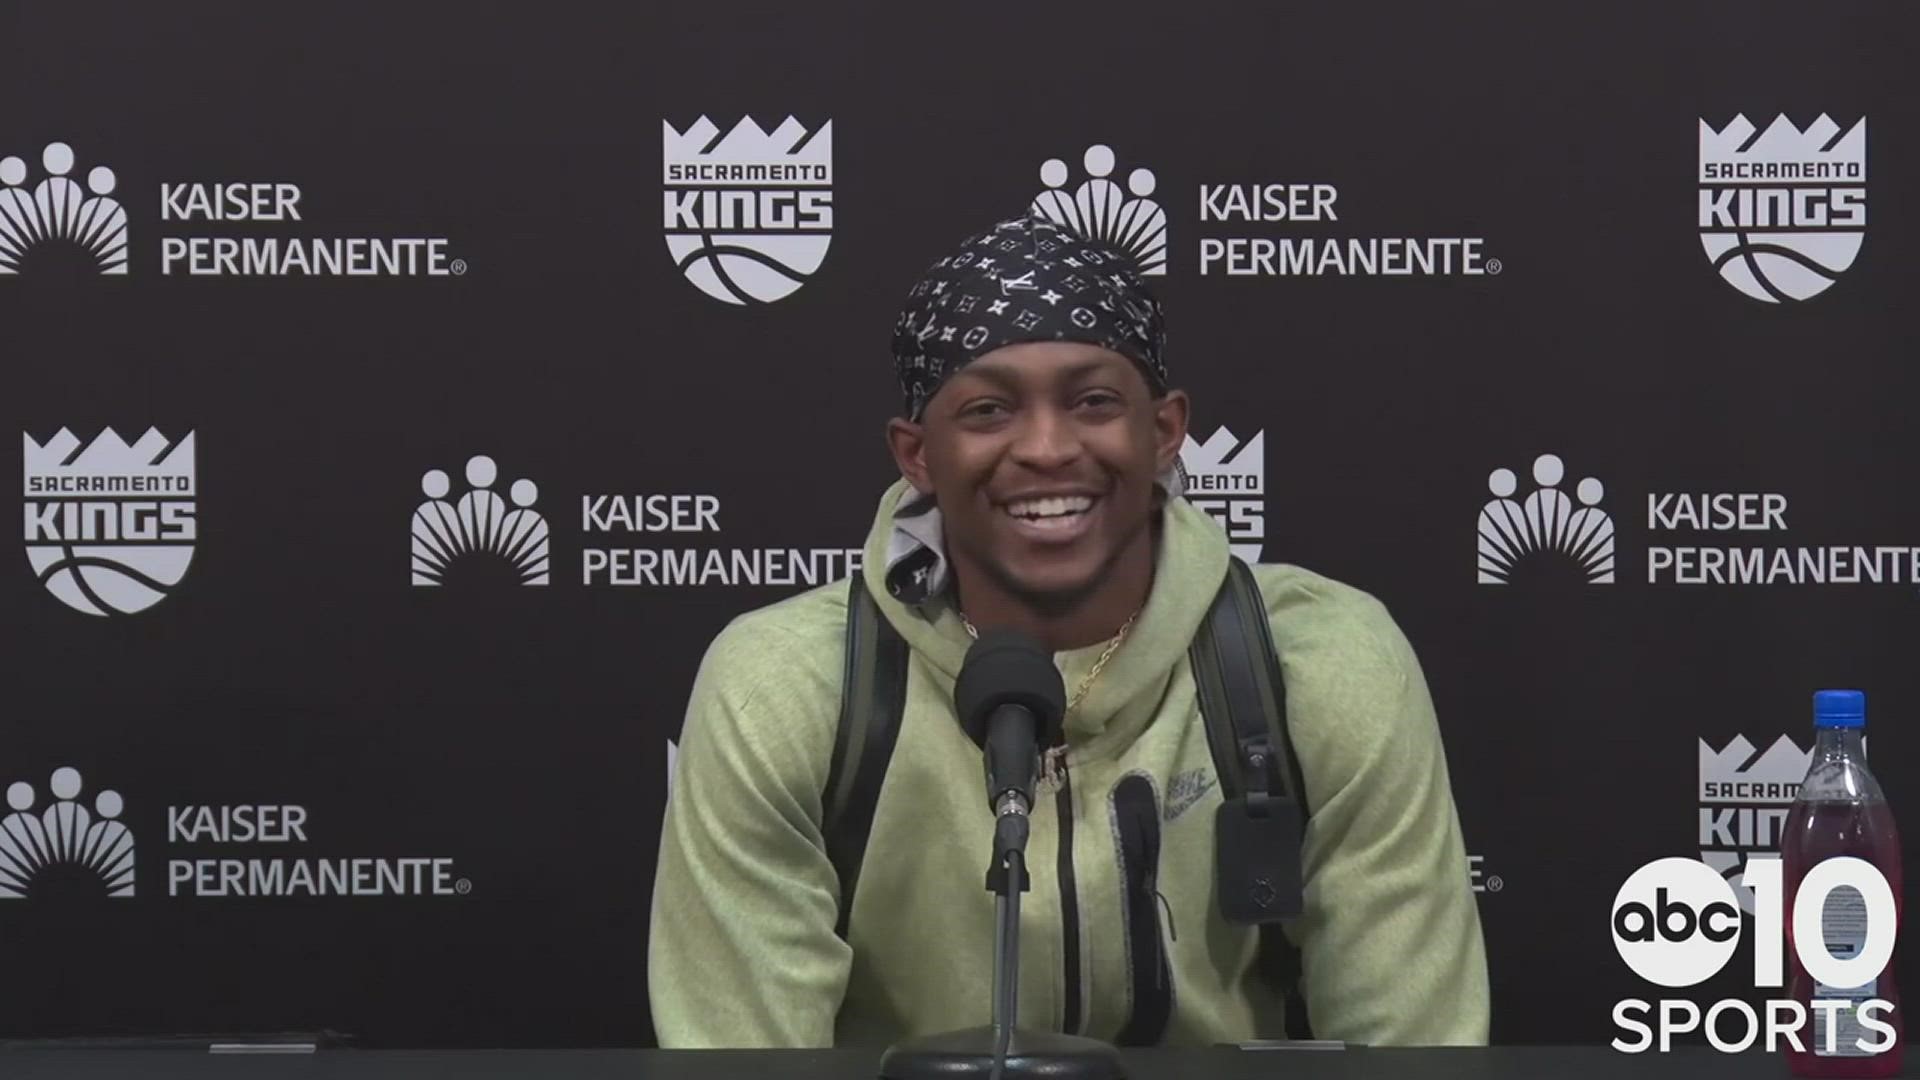 De'Aaron Fox talks about the Kings' 131-110 victory in Oklahoma City over the Thunder, the numbers he's posted recently and the big lift from Trey Lyles on Monday.